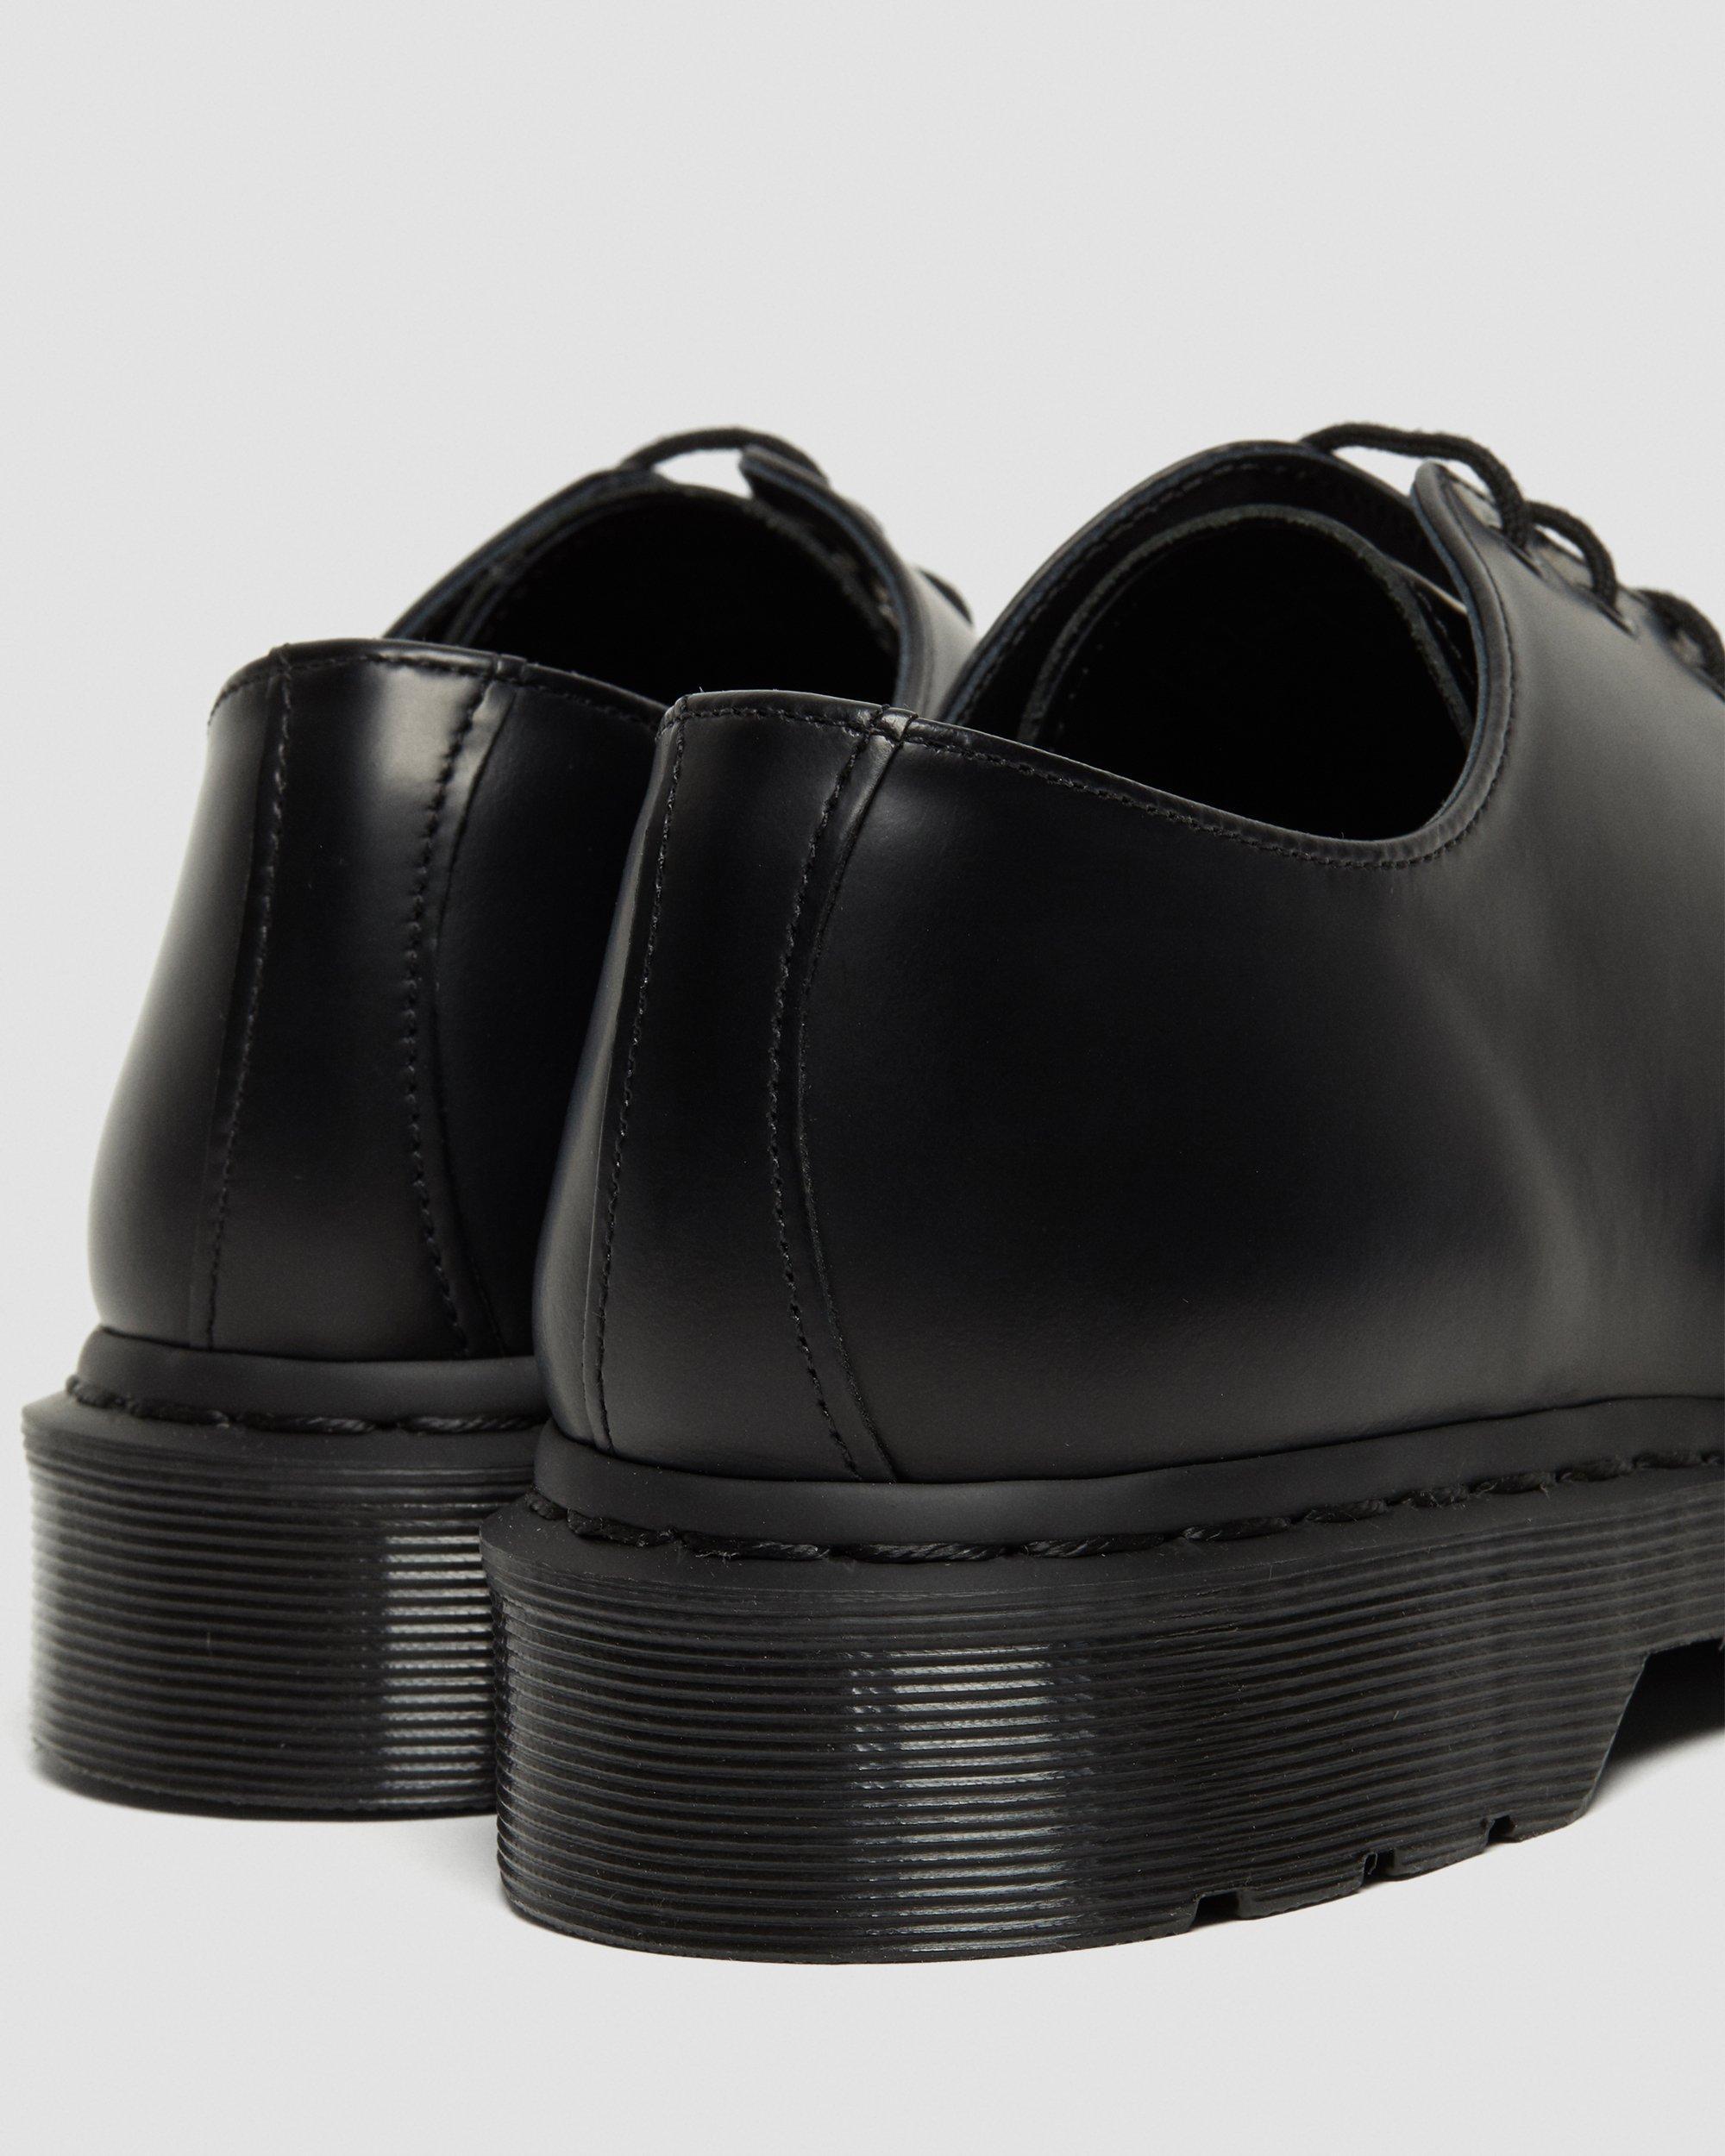 Dr. Martens 1461 Mono Smooth Leather Oxford Shoes in Black - Lyst